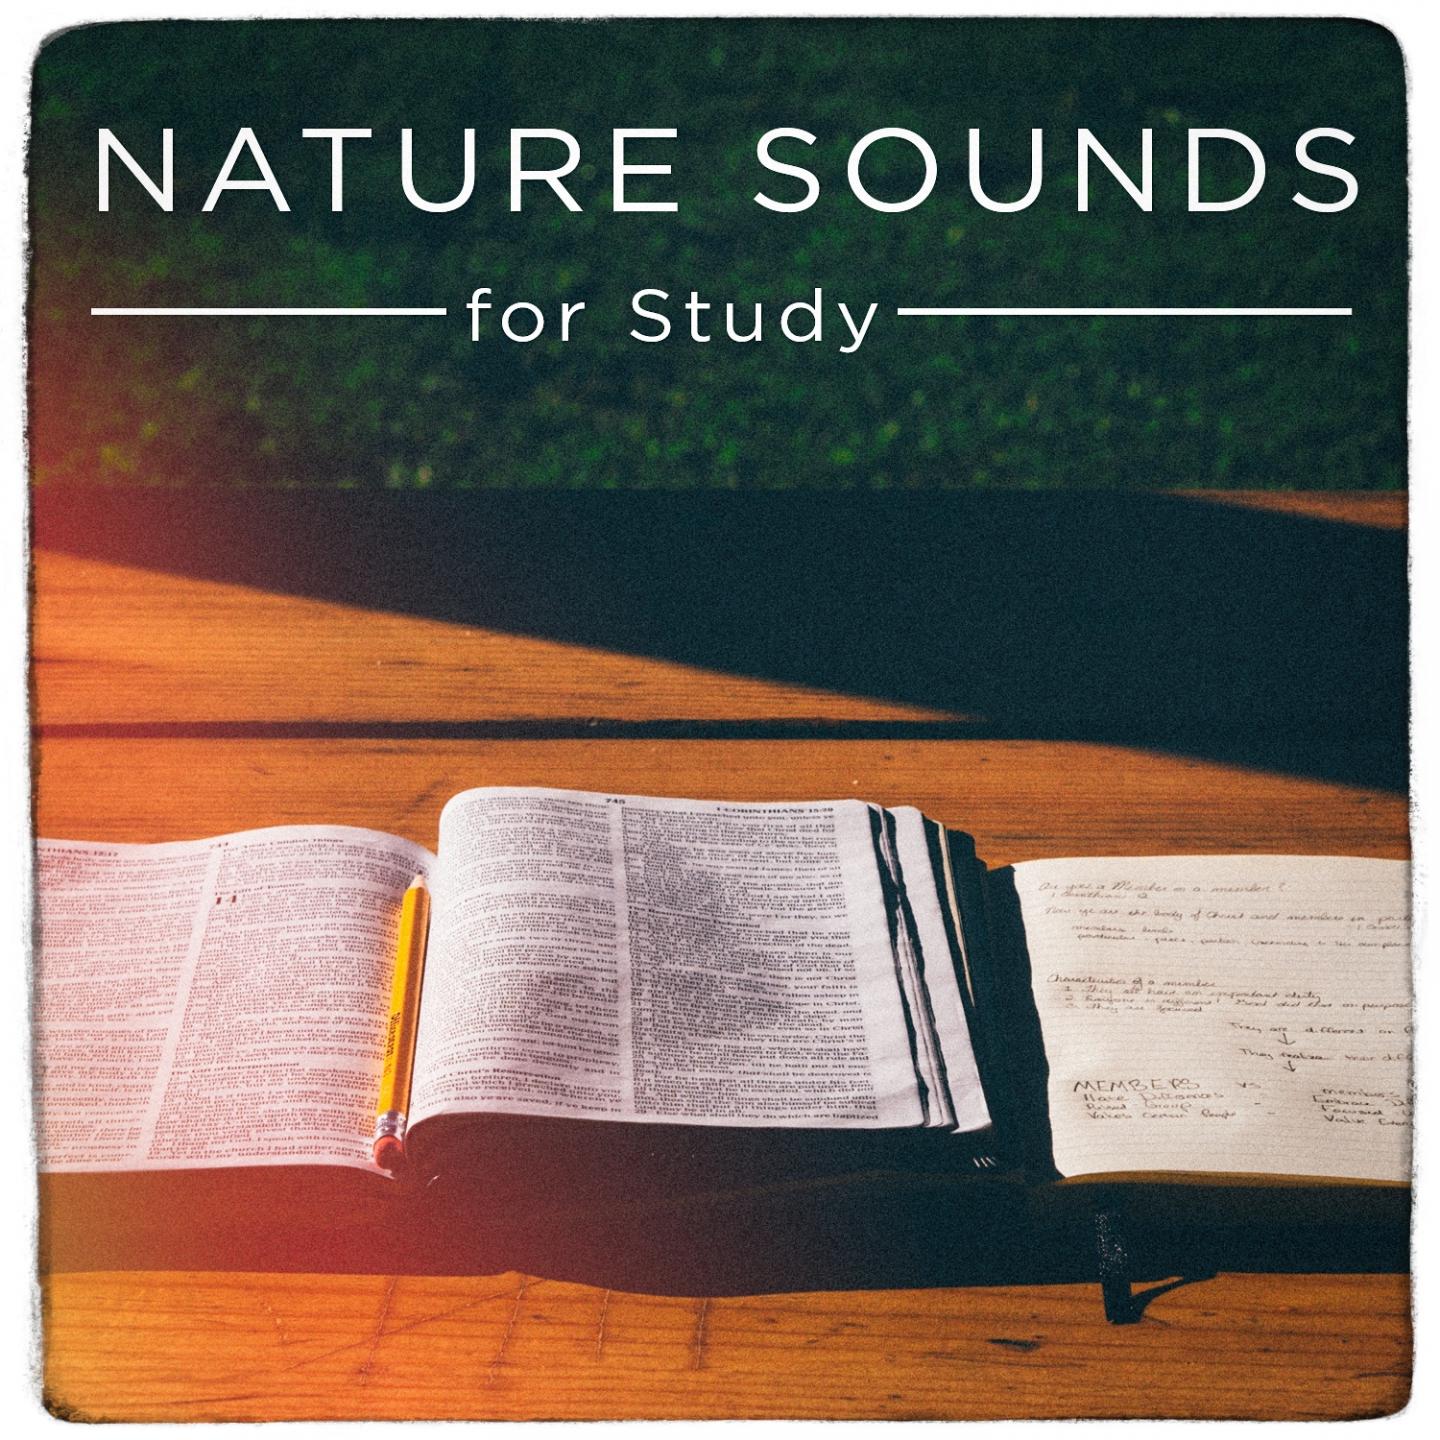 Nature Sounds for Study